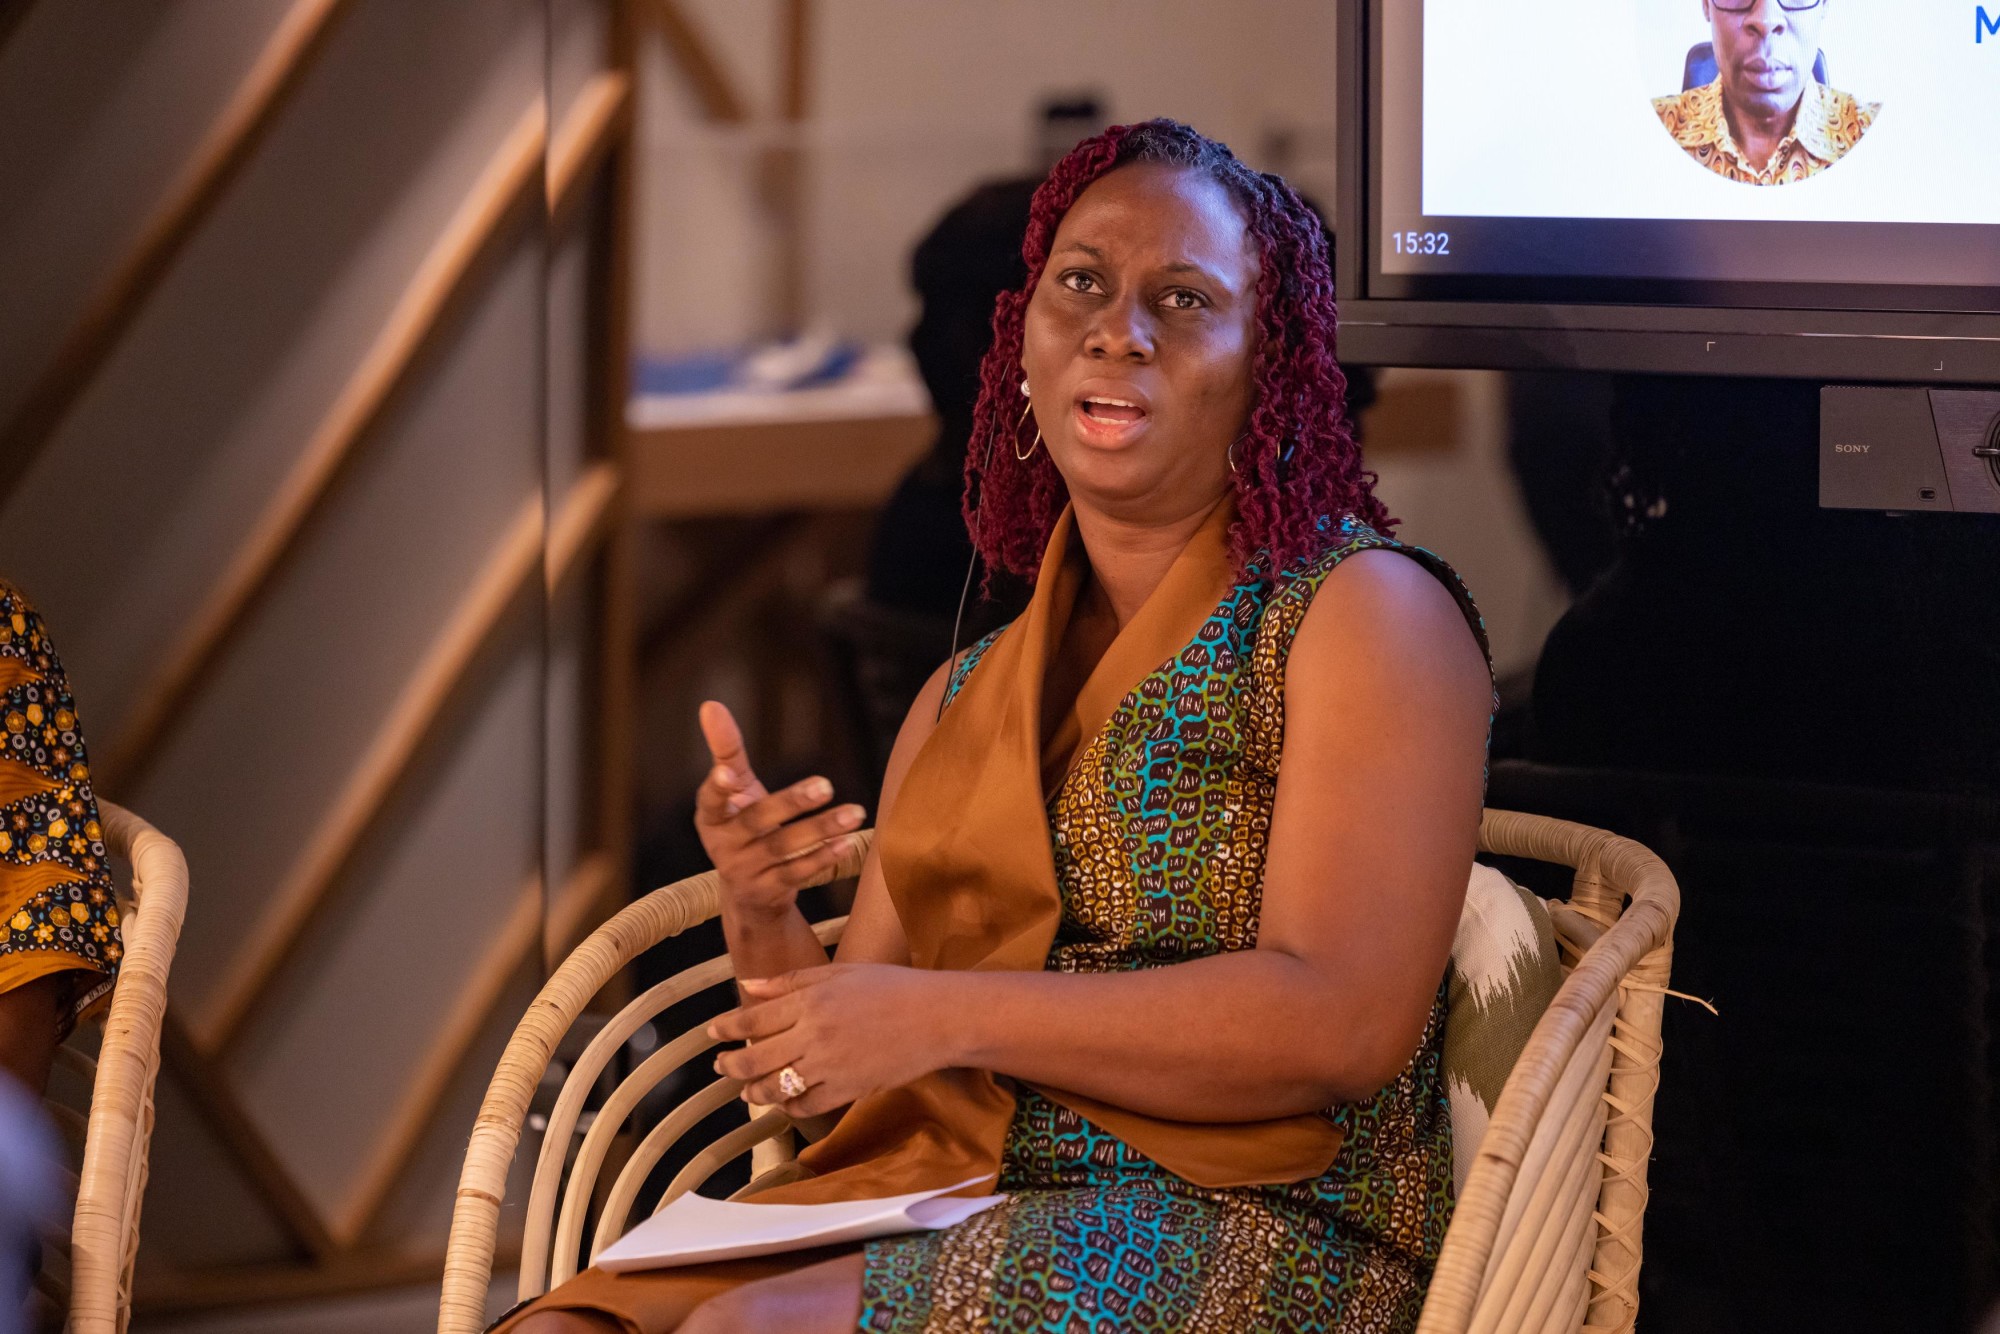 Ethel Cofie, Founder of Women in Tech Africa, Ghana during the Development Solutions for Stronger Education and Human Capital talk at Nexus m22974